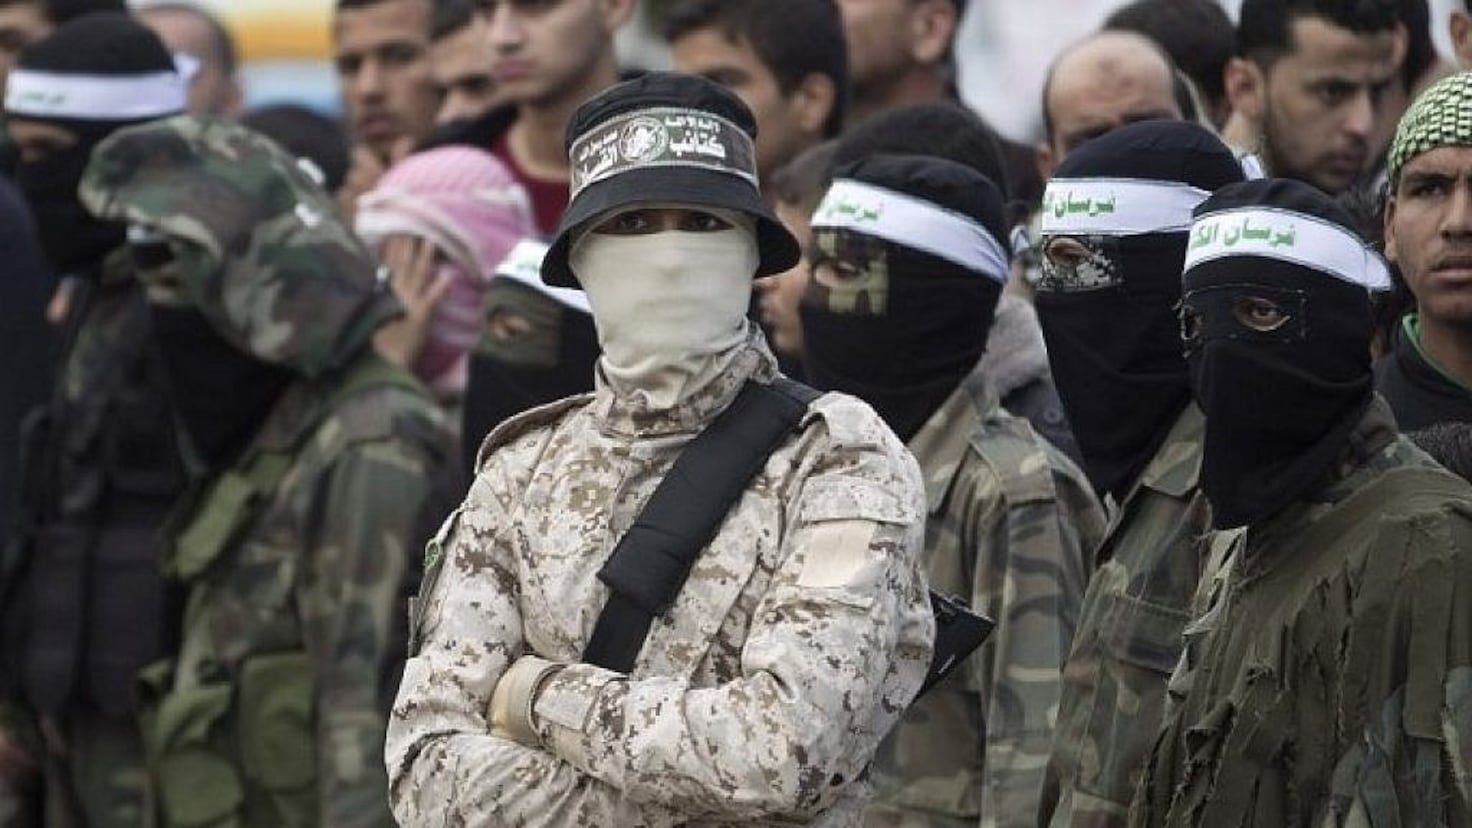 What are the Ezzeldin al Qassam Brigades that have attacked Israel and what is their role in Hamas?
